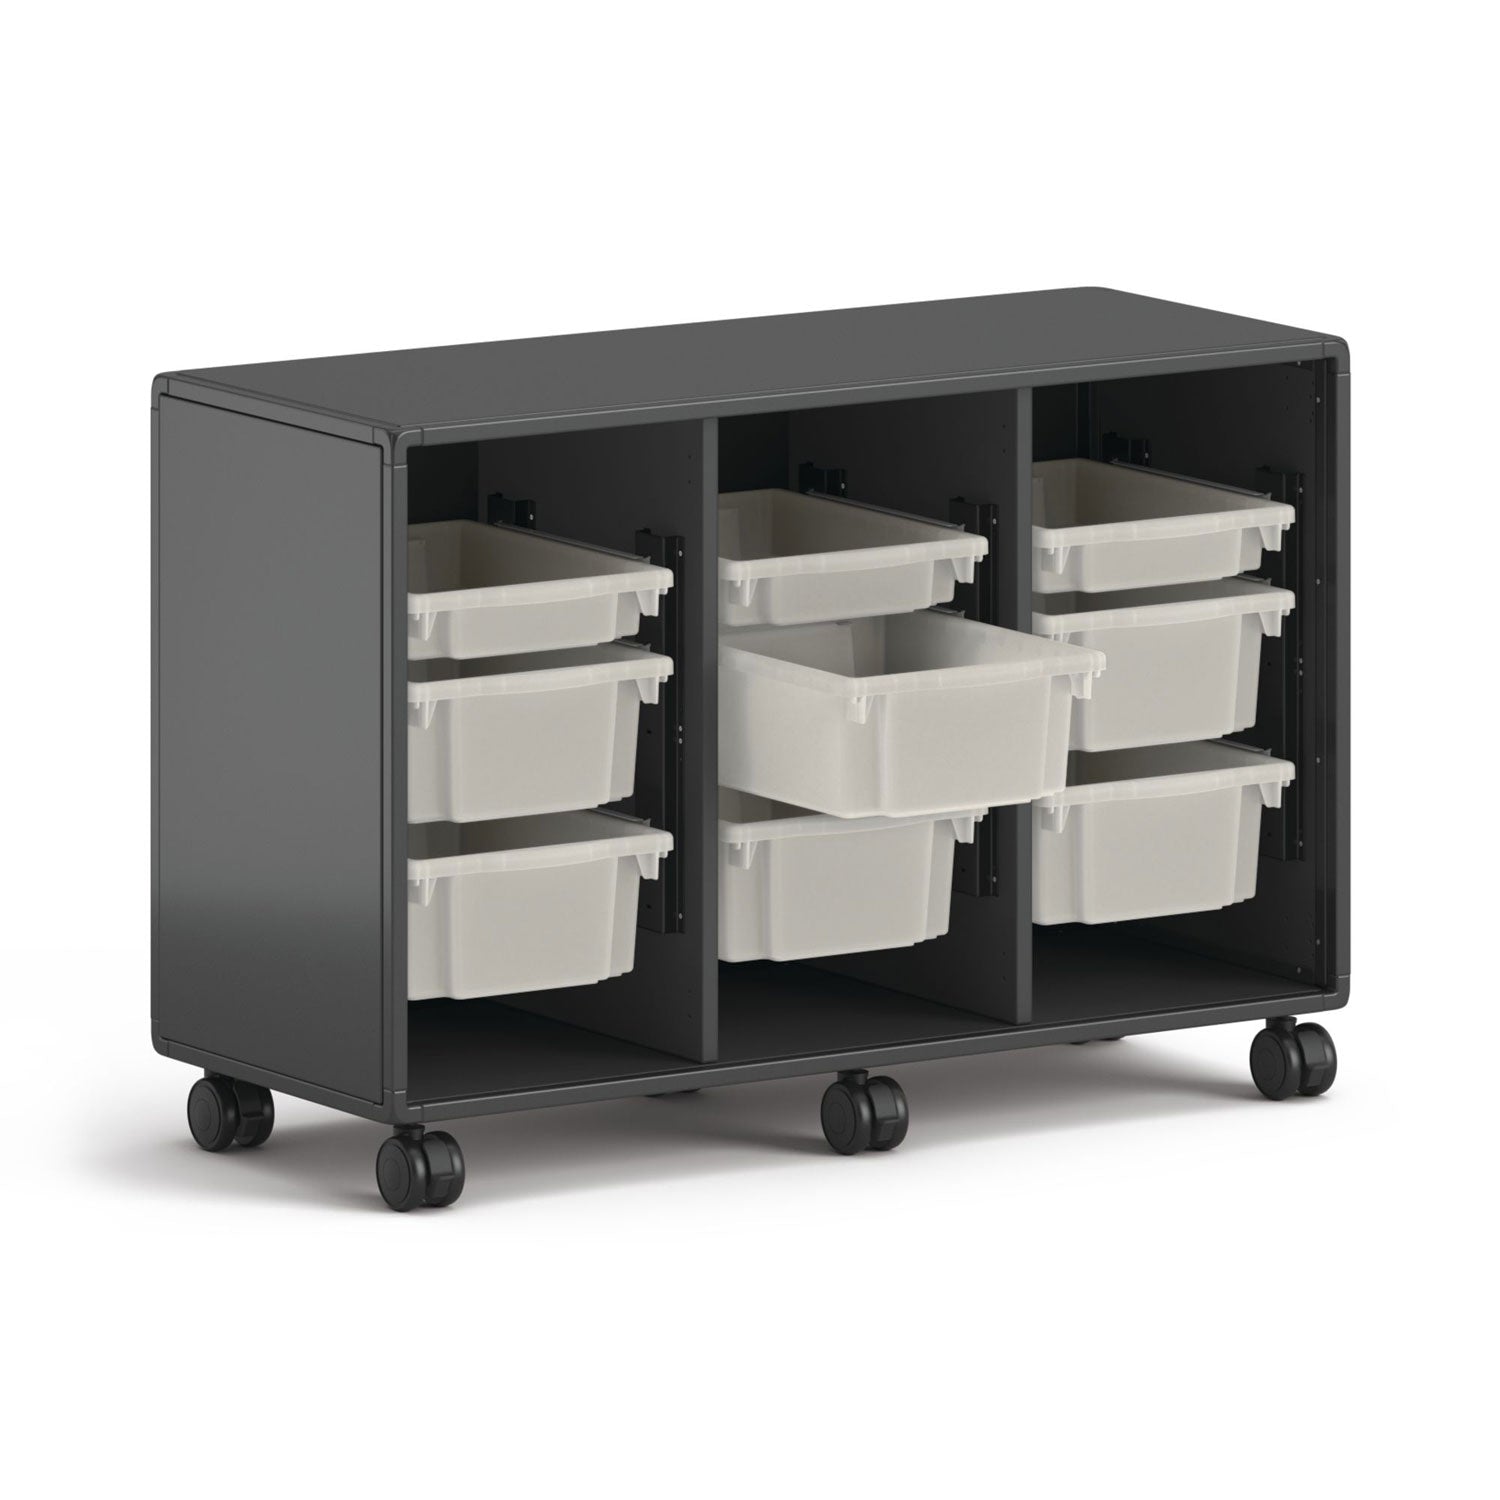 class-ifi-tote-storage-cabinet-three-wide-4663-x-1875-x-3138-charcoal-gray_honest2h3wnssna - 4